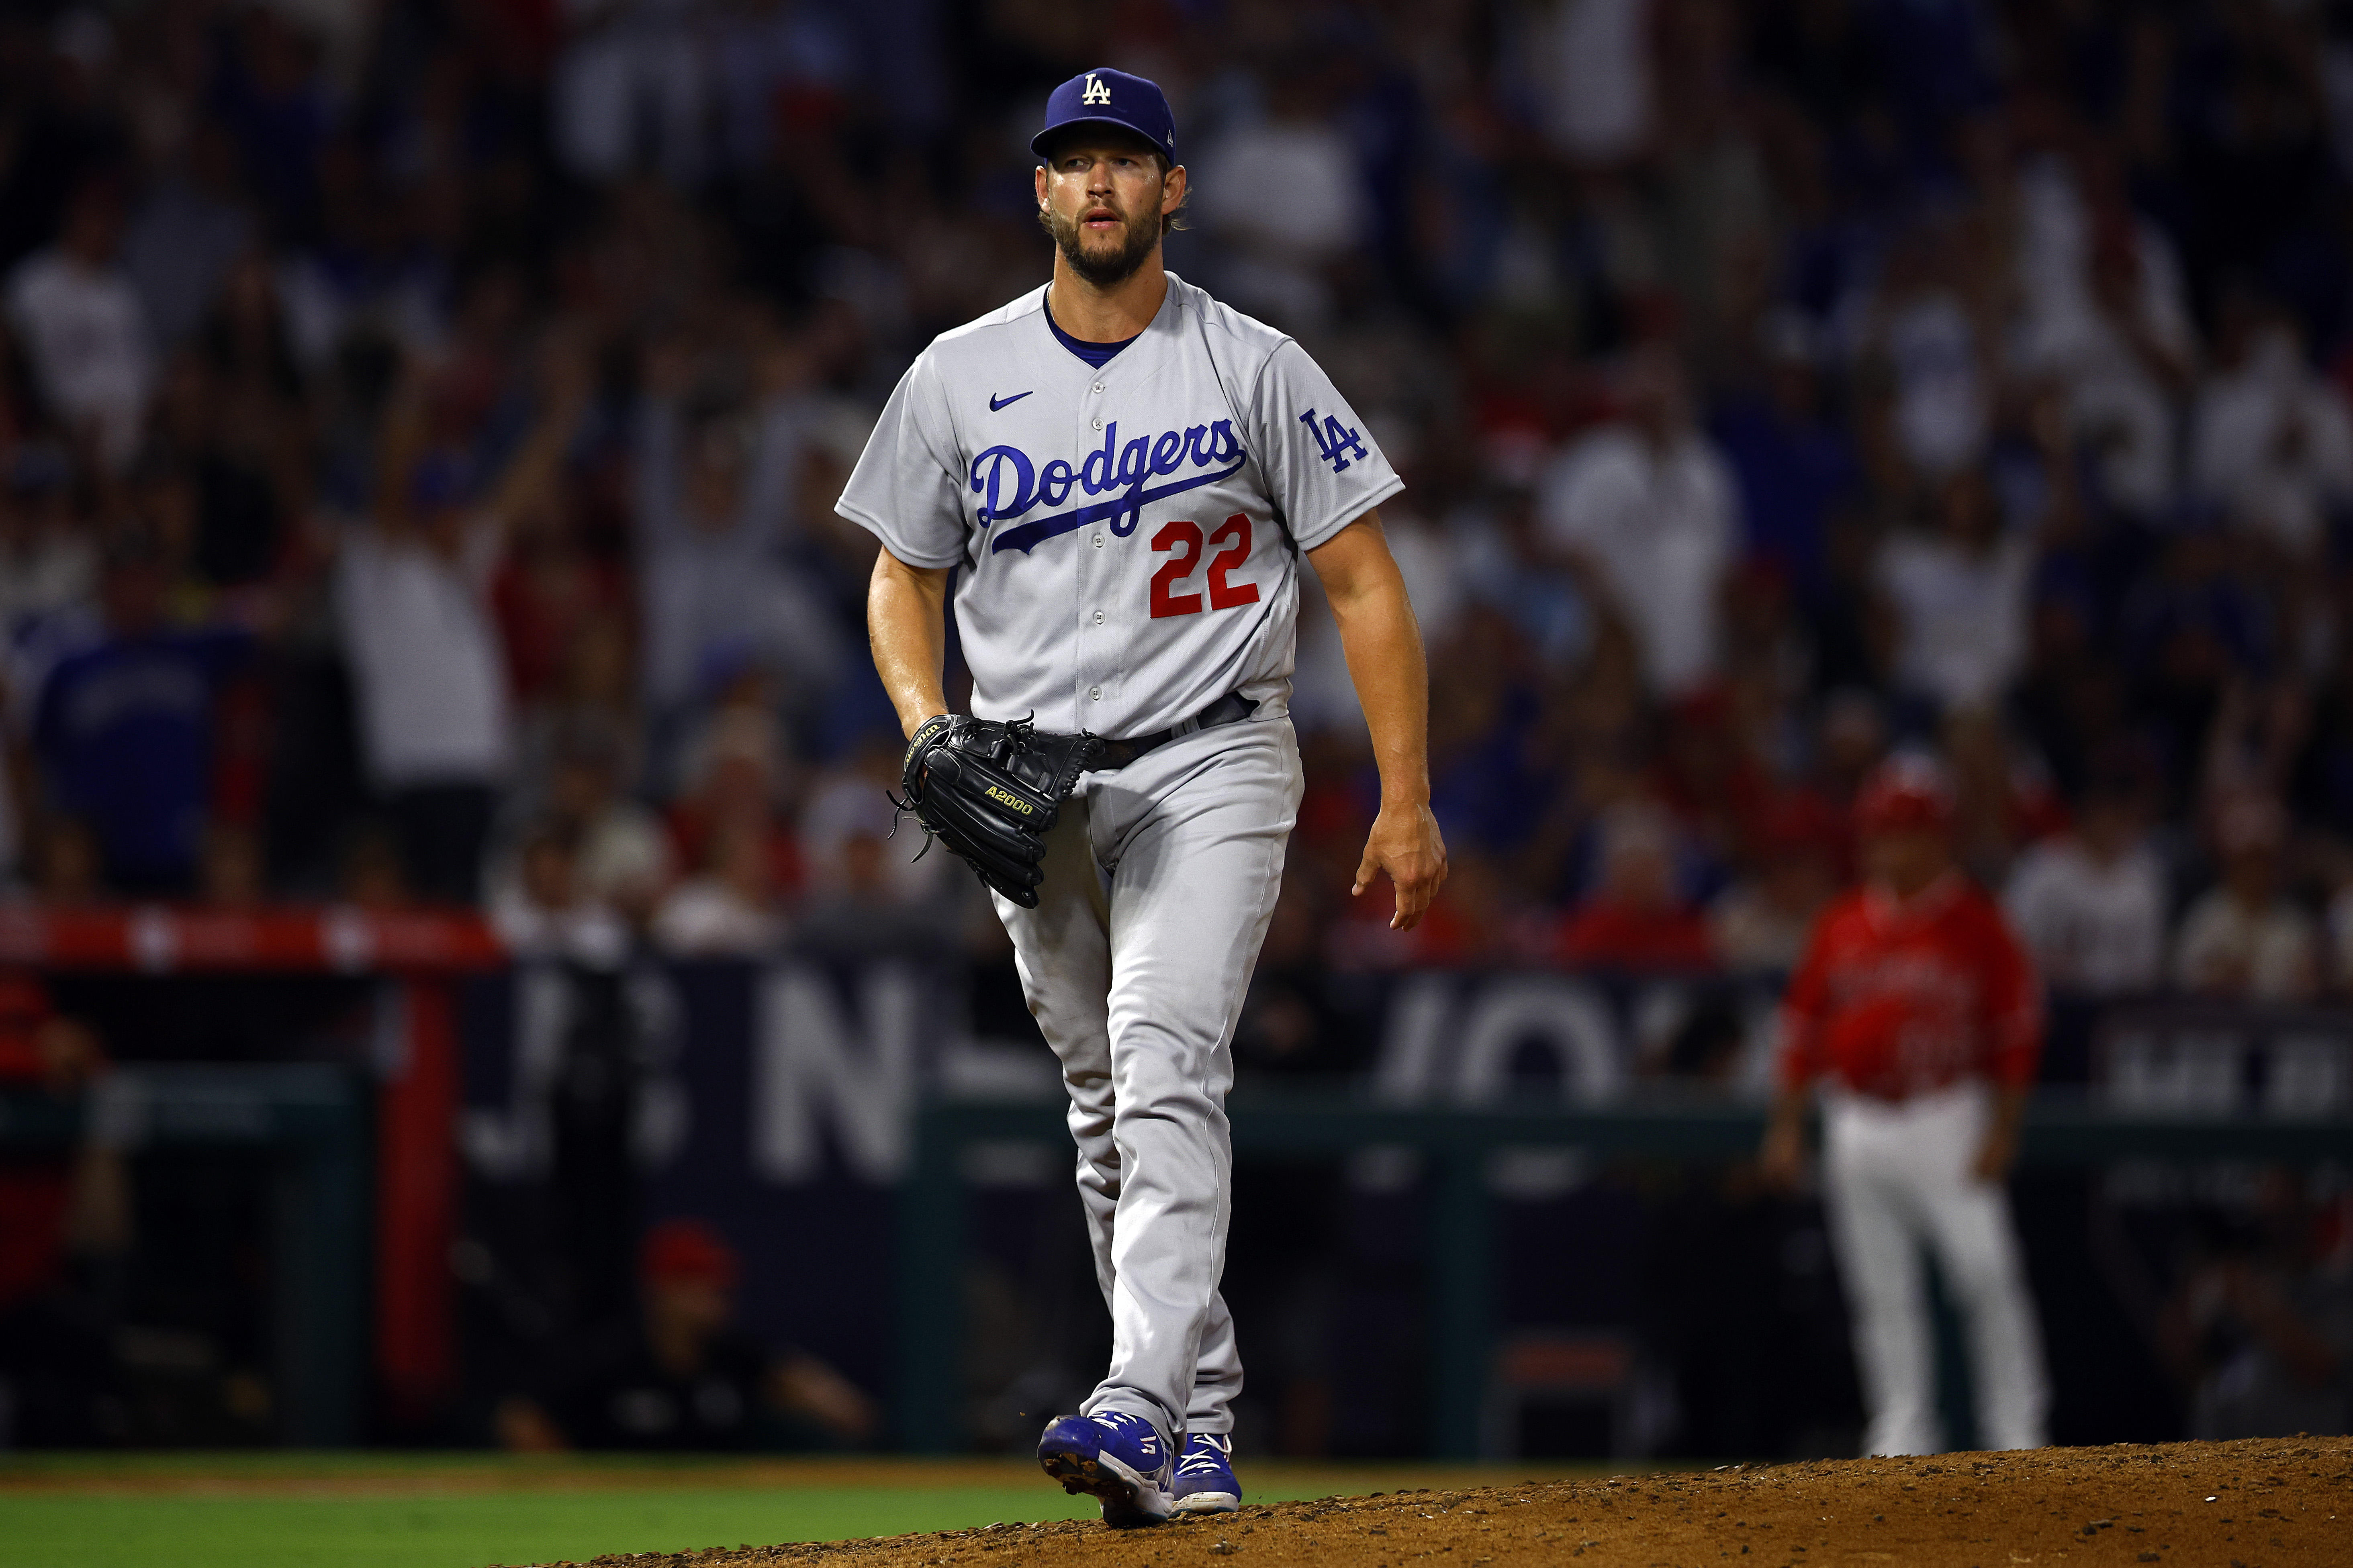 Clayton Kershaw #22 of the Los Angeles Dodgers after the third out against the Los Angeles Angels in the seventh inning at Angel Stadium of Anaheim on July 15, 2022 in Anaheim, California.